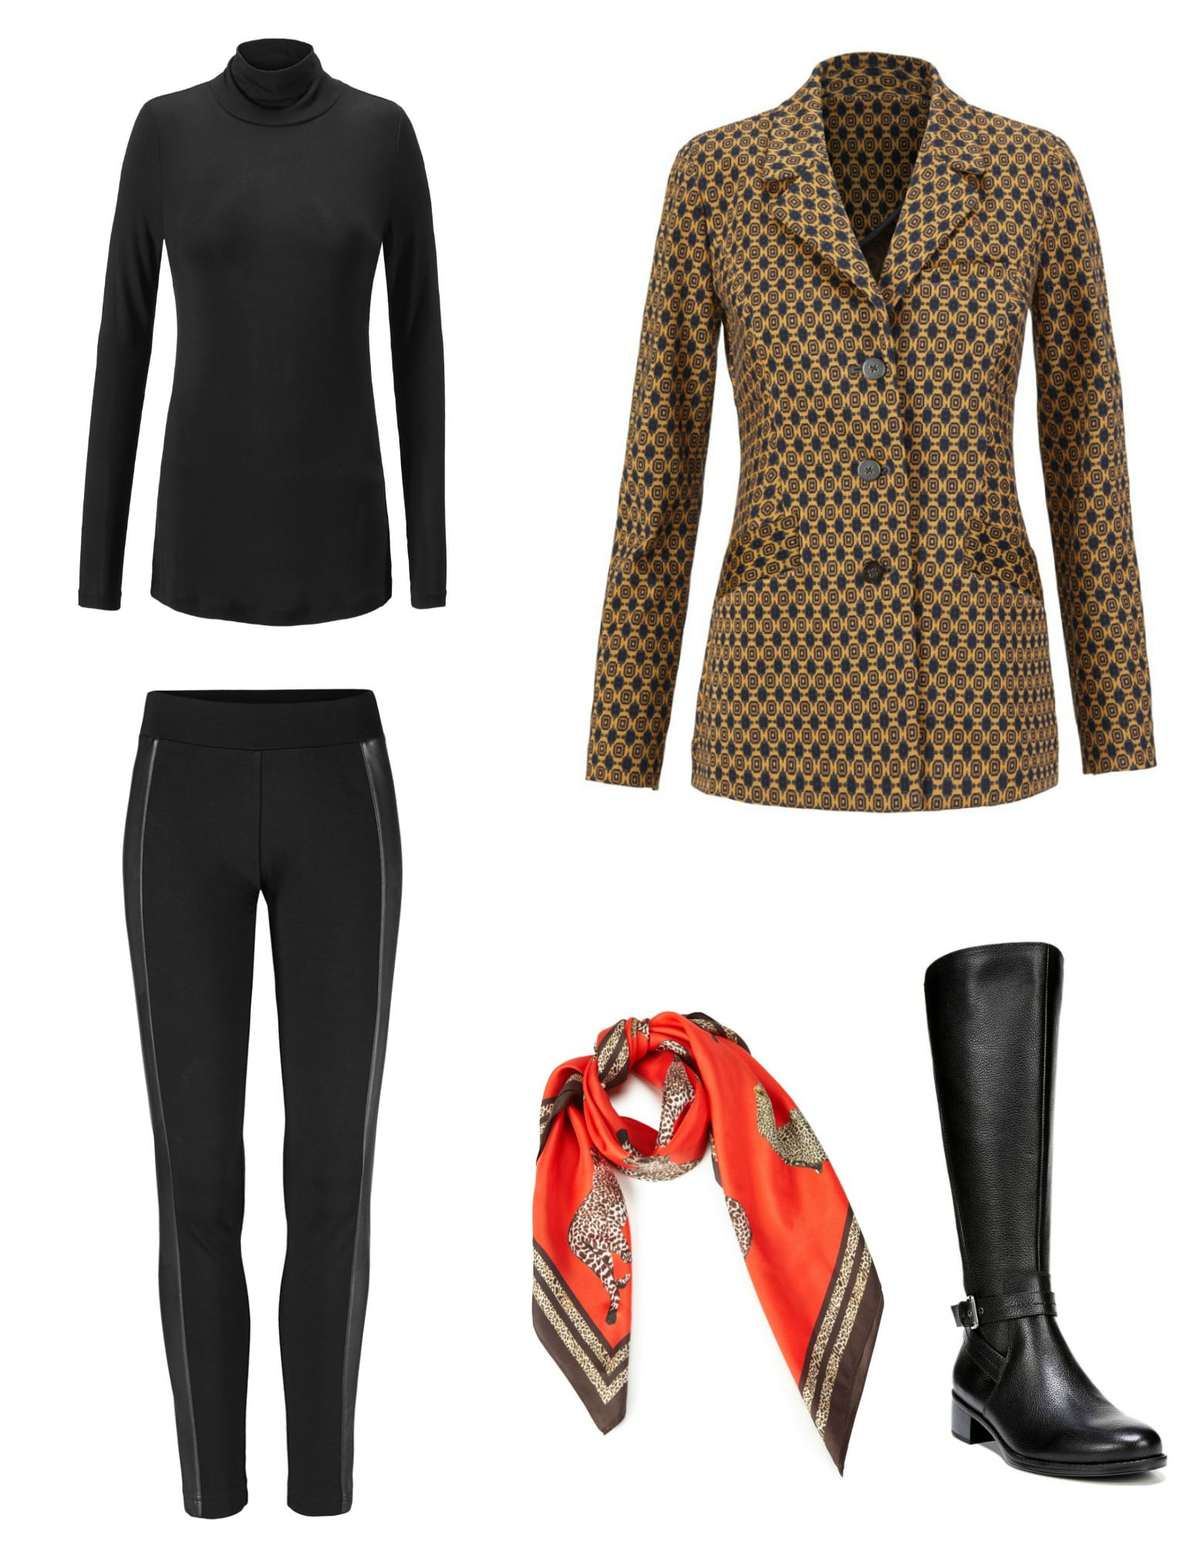 The cabi Standout Jacket styled with the cabi Bexley Legging and Layer Turtleneck, accessoried with the cabi Deidre scarf and Naturalizer Winnie riding boots